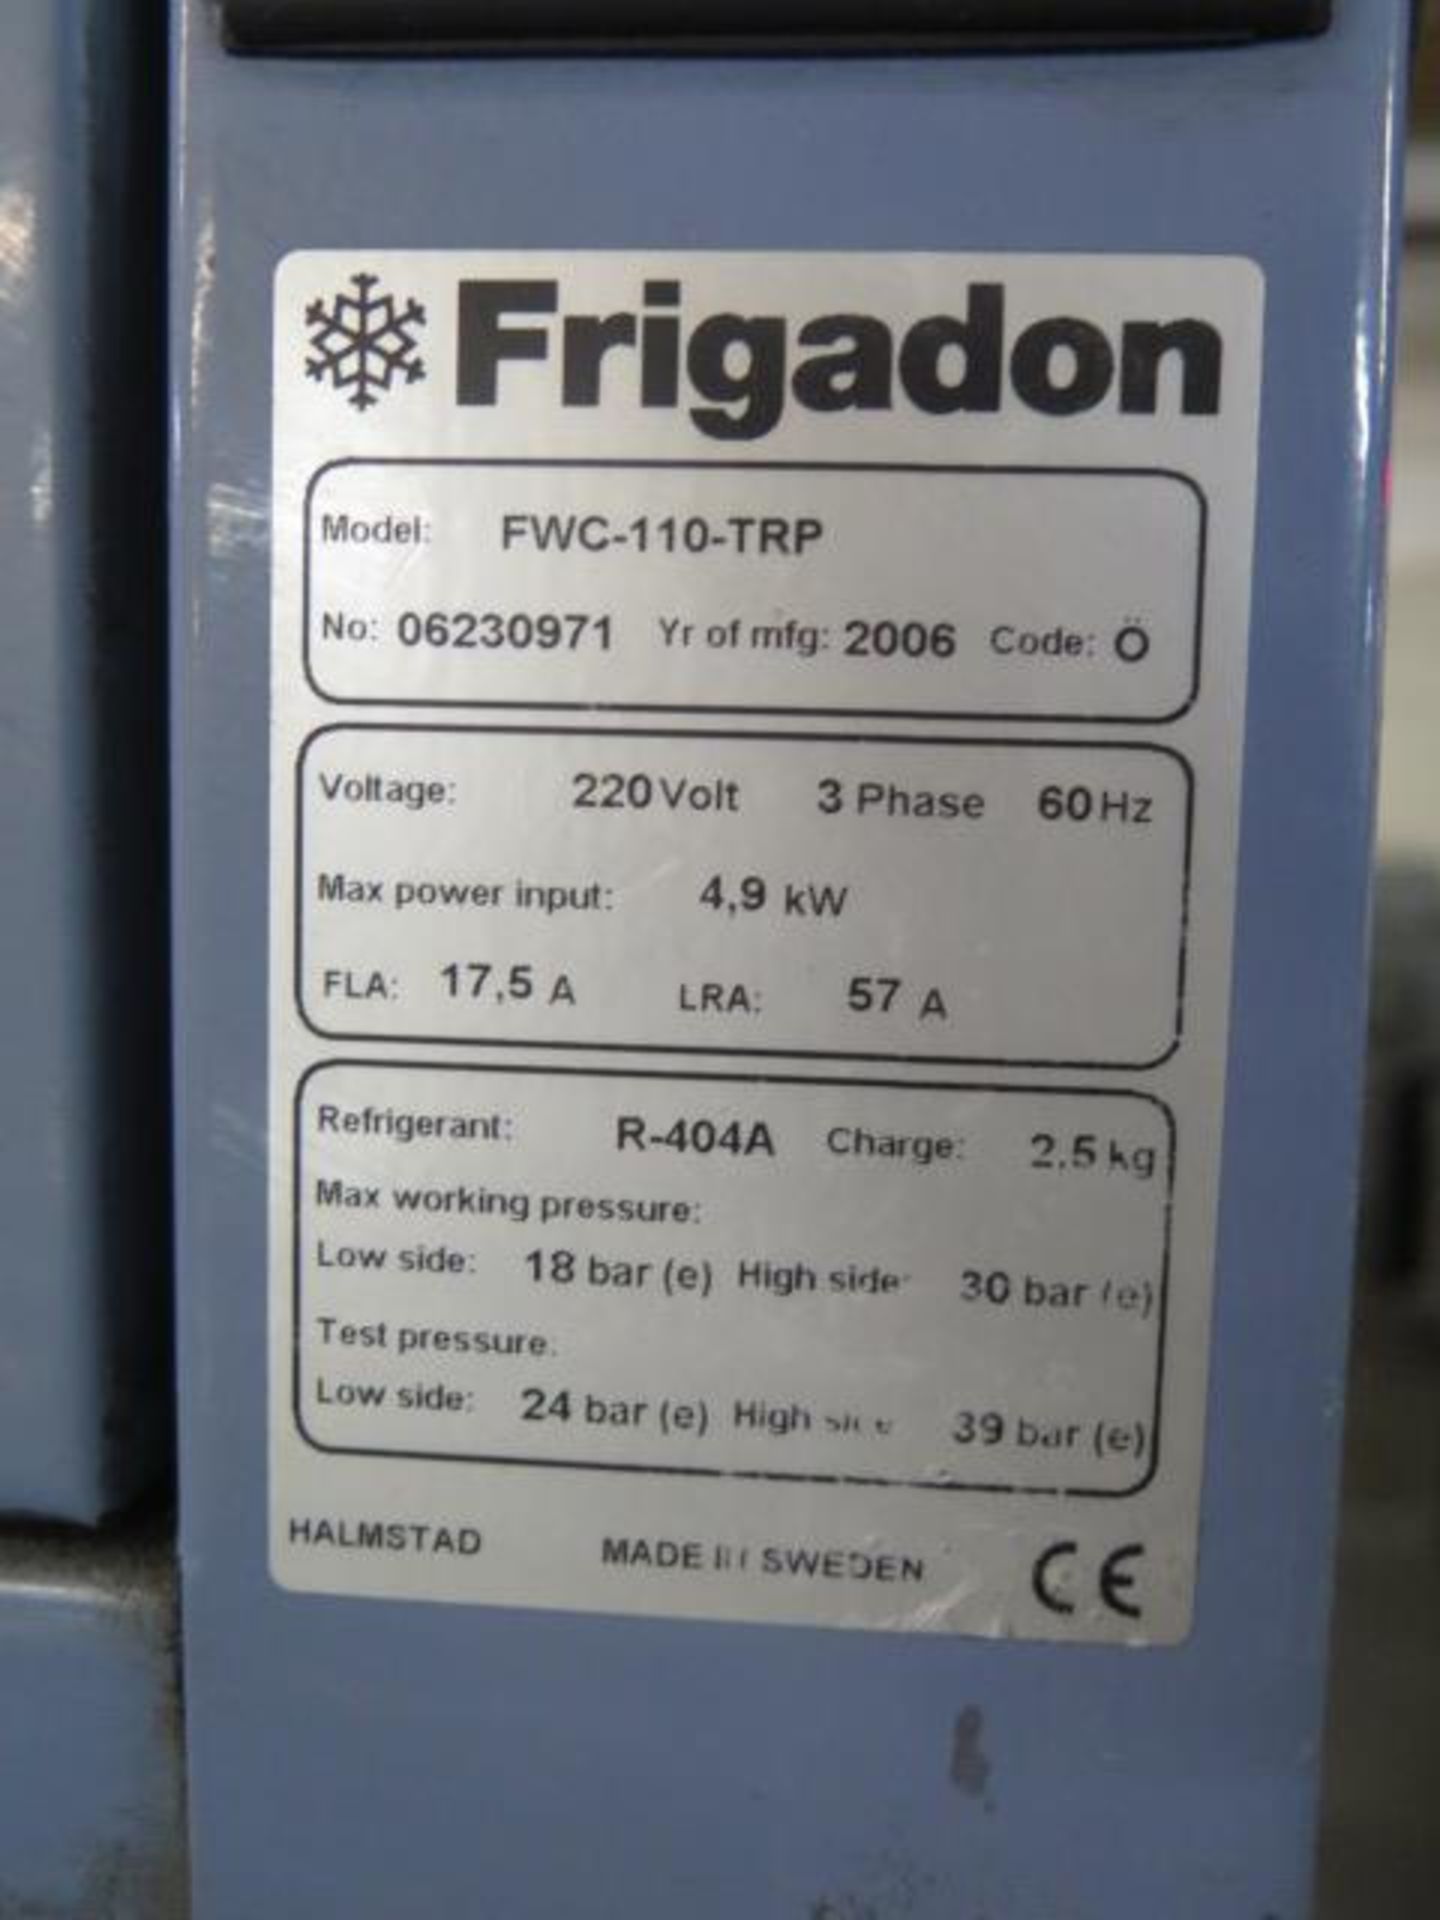 2006 Frigadon FWC-110-TRP Transor Filter System s/n 06230971 (Refrigeration and Micron) SOLD AS IS - Image 9 of 9